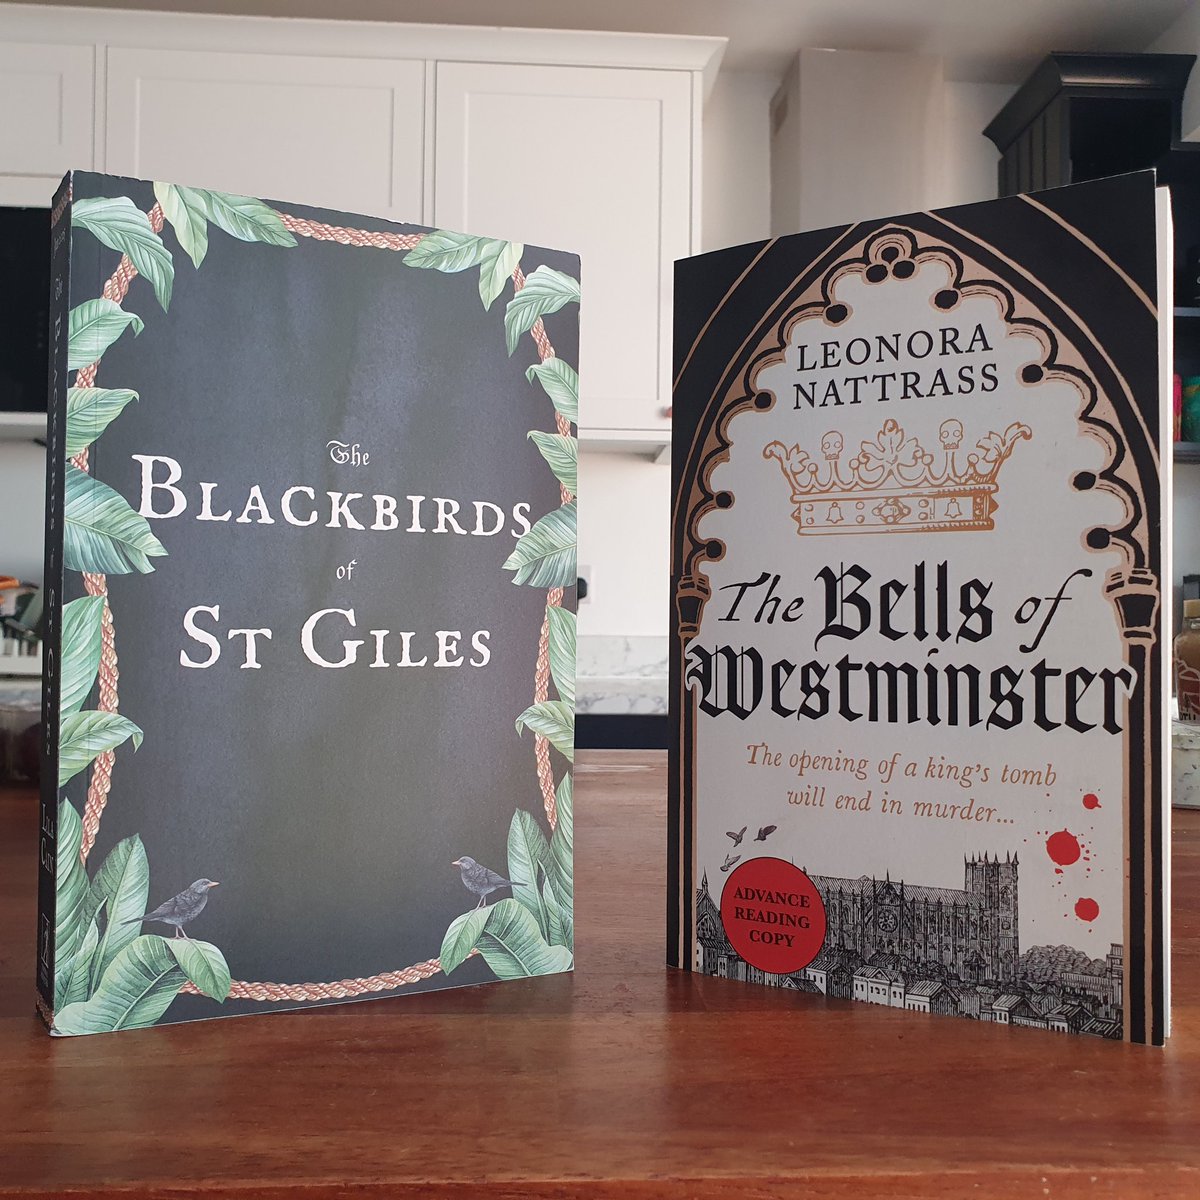 A fantastic historical face off in #bookpost today! Thank you to @LeonoraNattrass @ViperBooks @KateAGriffin for keeping me in fine reading material - both Blackbirds and Bells look superb 📚📚📚